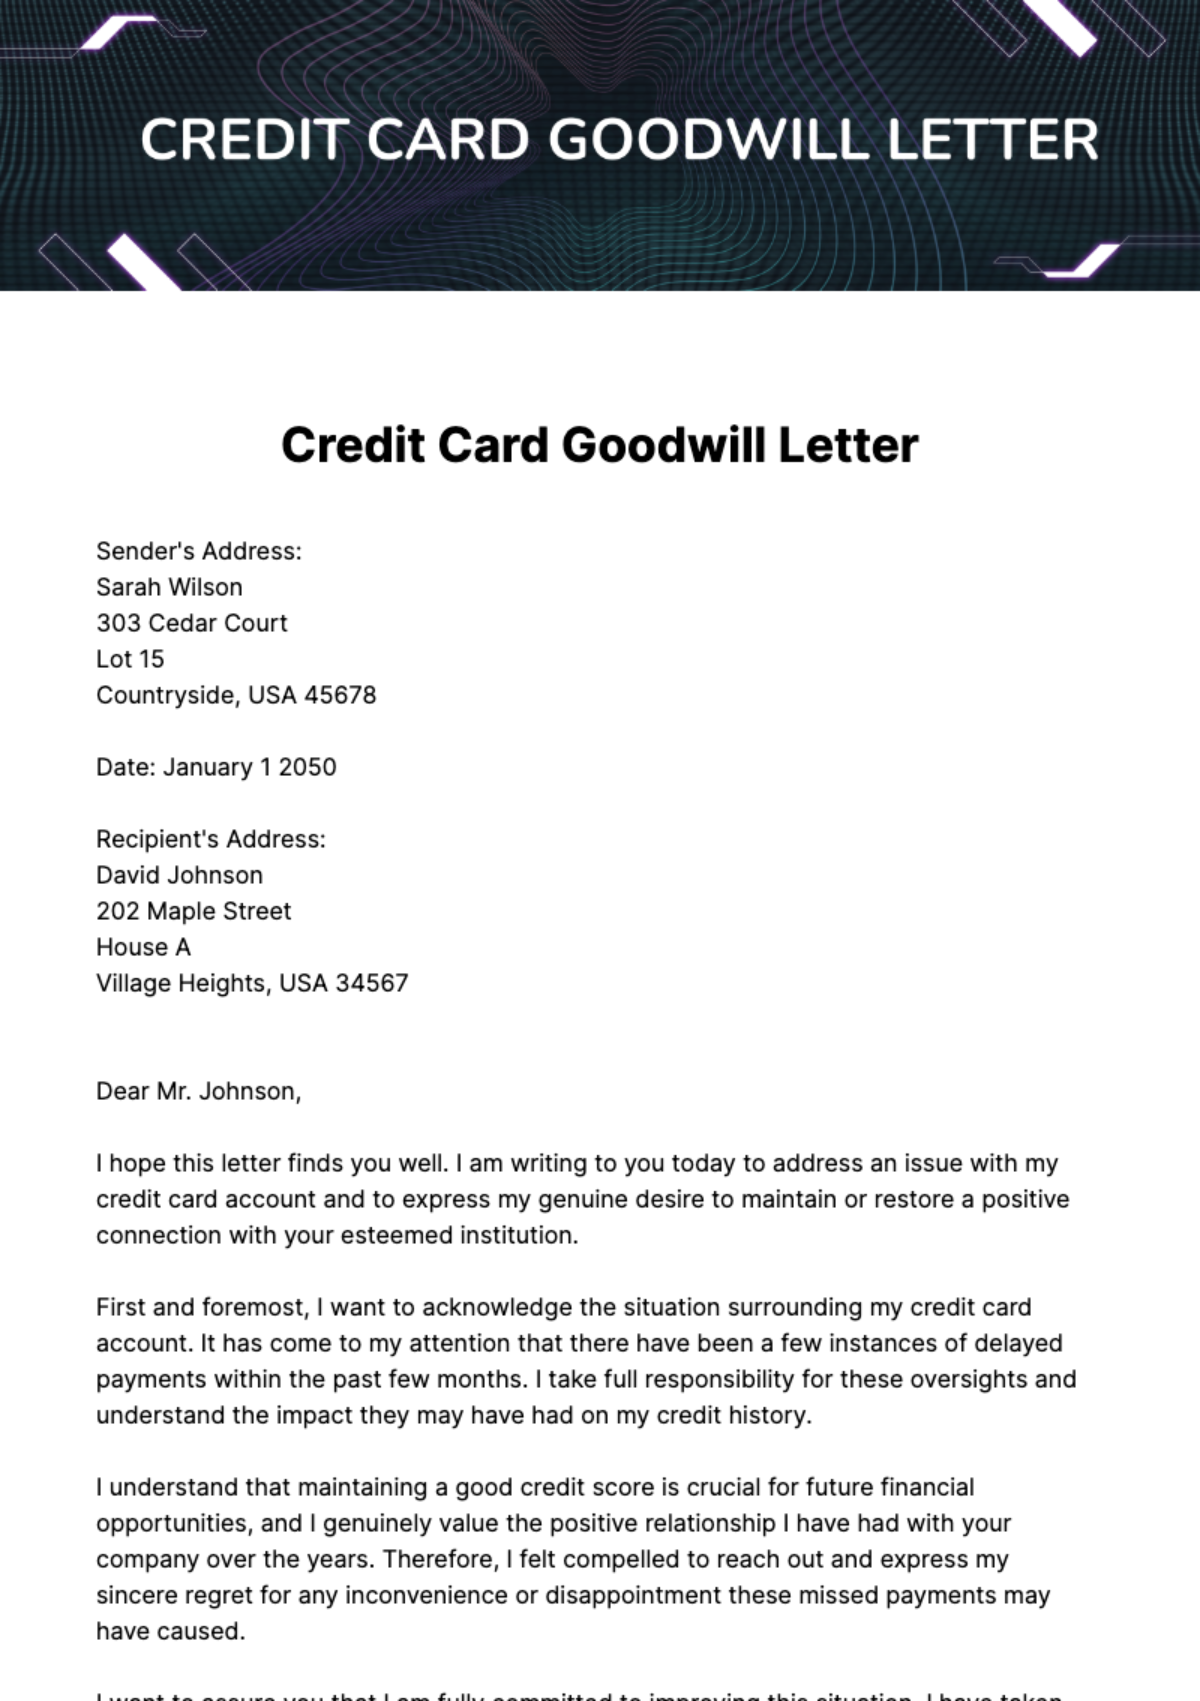 Free Credit Card Goodwill Letter Template